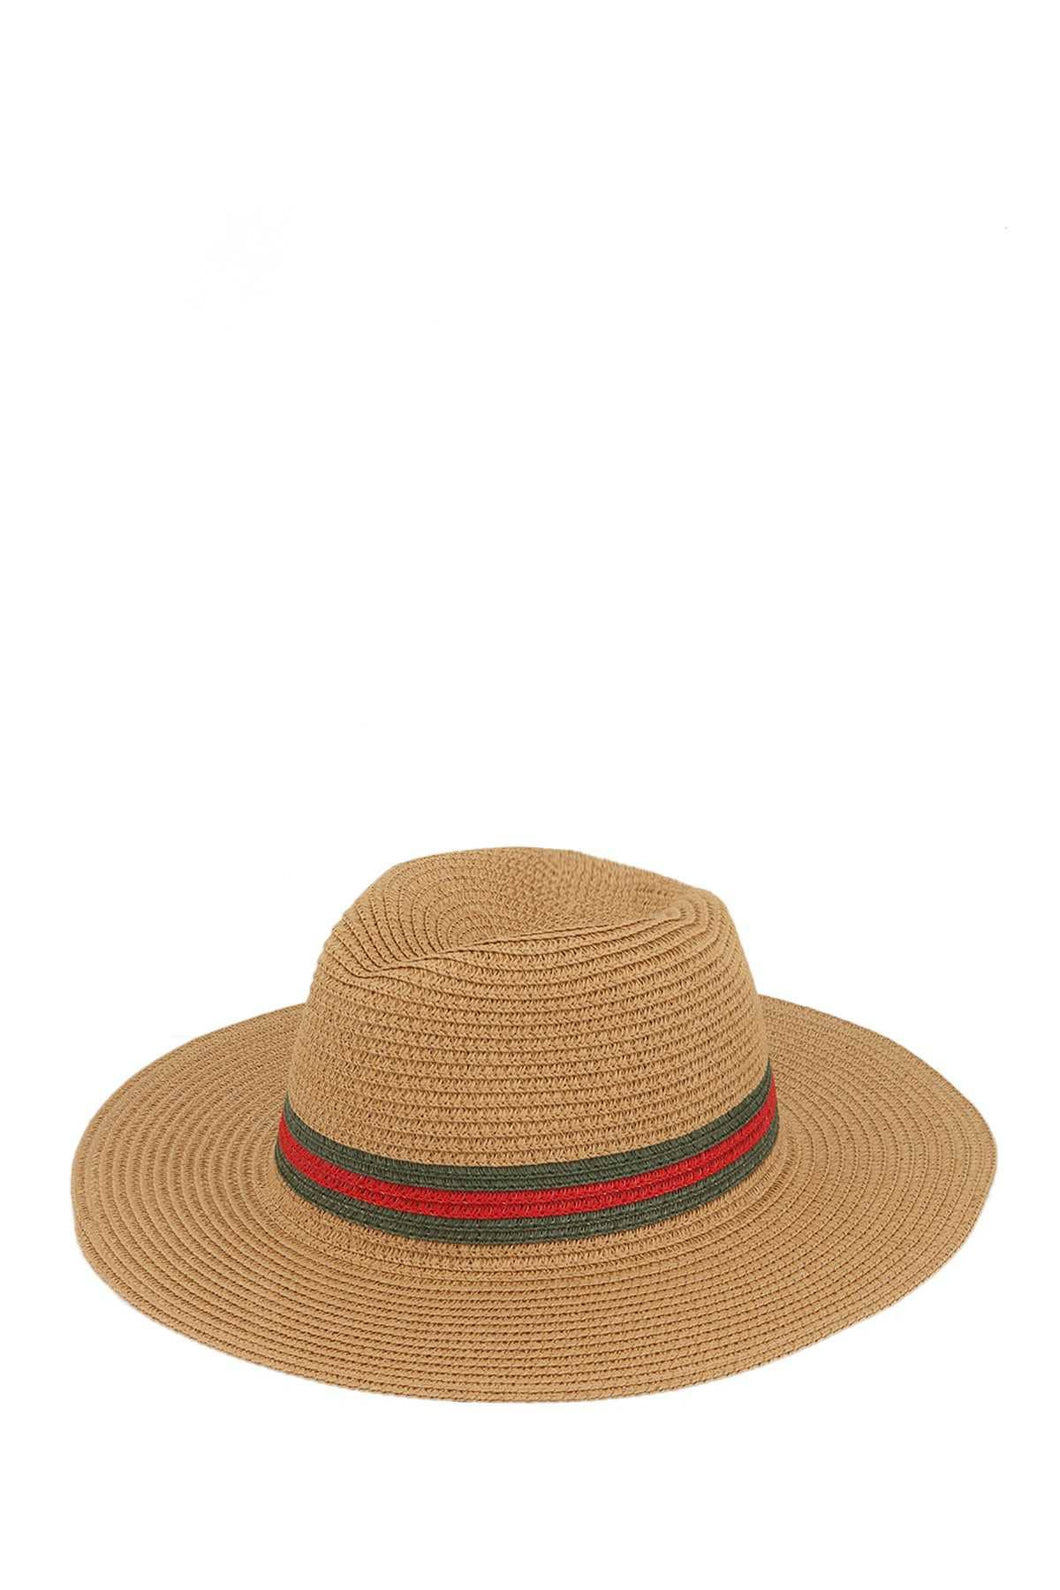 Shop Neighbors - Green and Red Accent Straw Fedora Hat